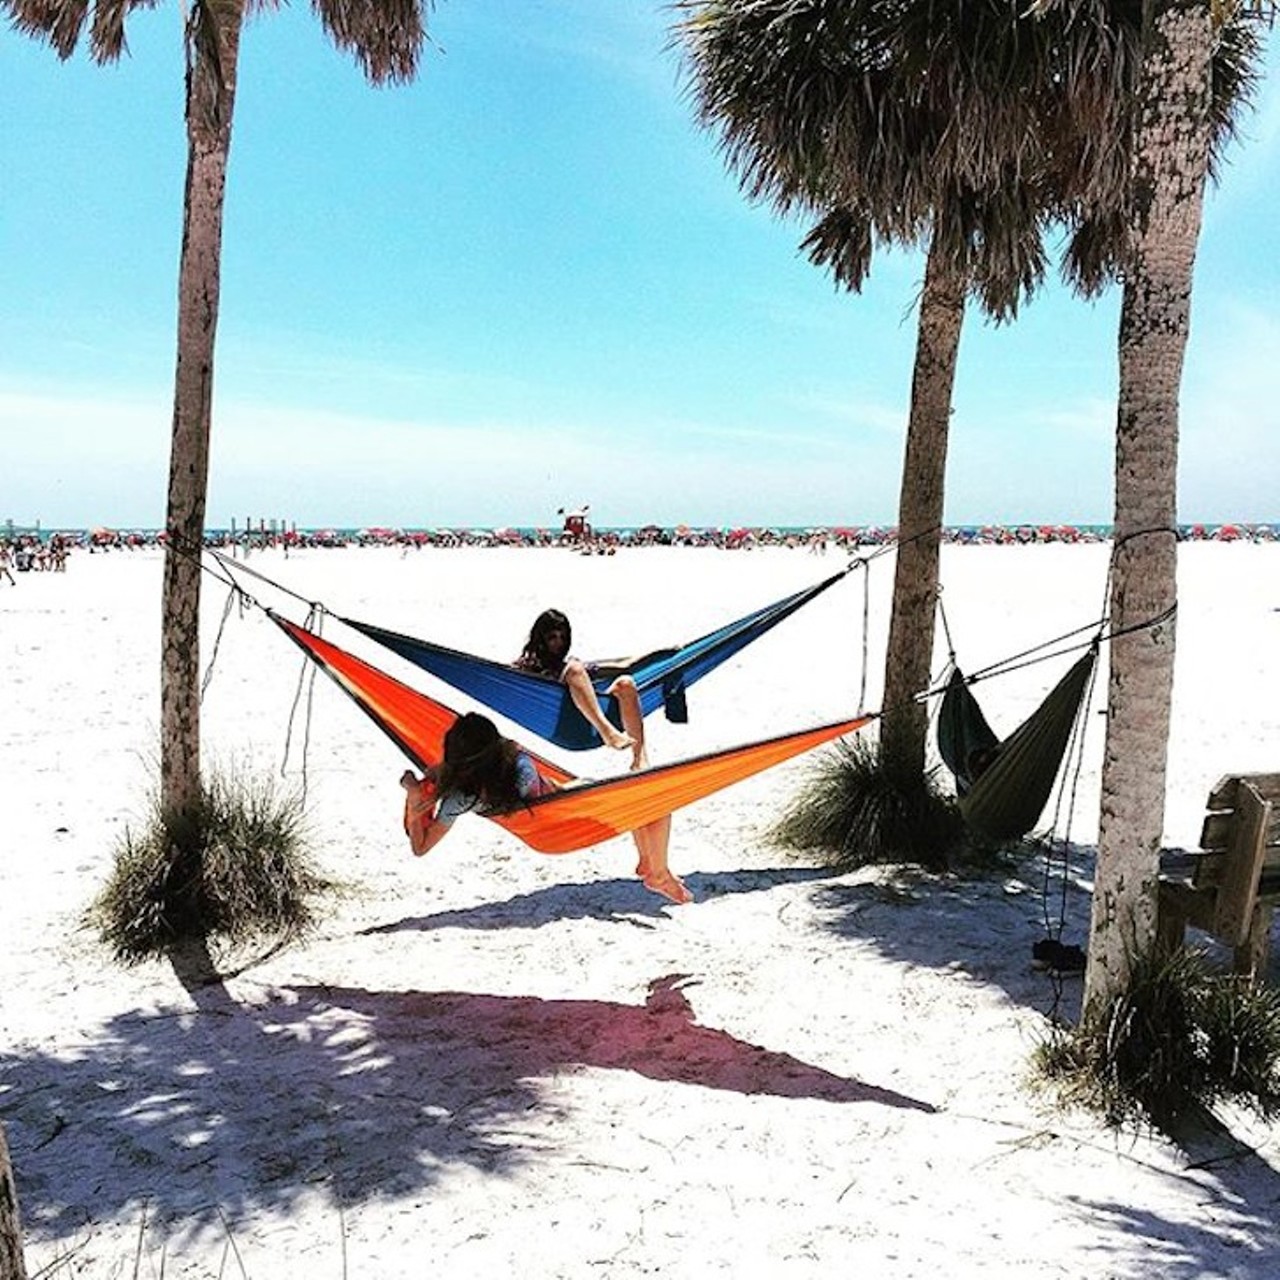 SIESTA BEACH
The moment your toes touch the warm, soft white sand on Siesta Beach, you'll know you made the right choice. Have your fun in the sun, then stick around for drum circle, which happens every Sunday night at sunset.
Distance: 2 hour and 35 minutes
Photo via thomahawkes/Instagram